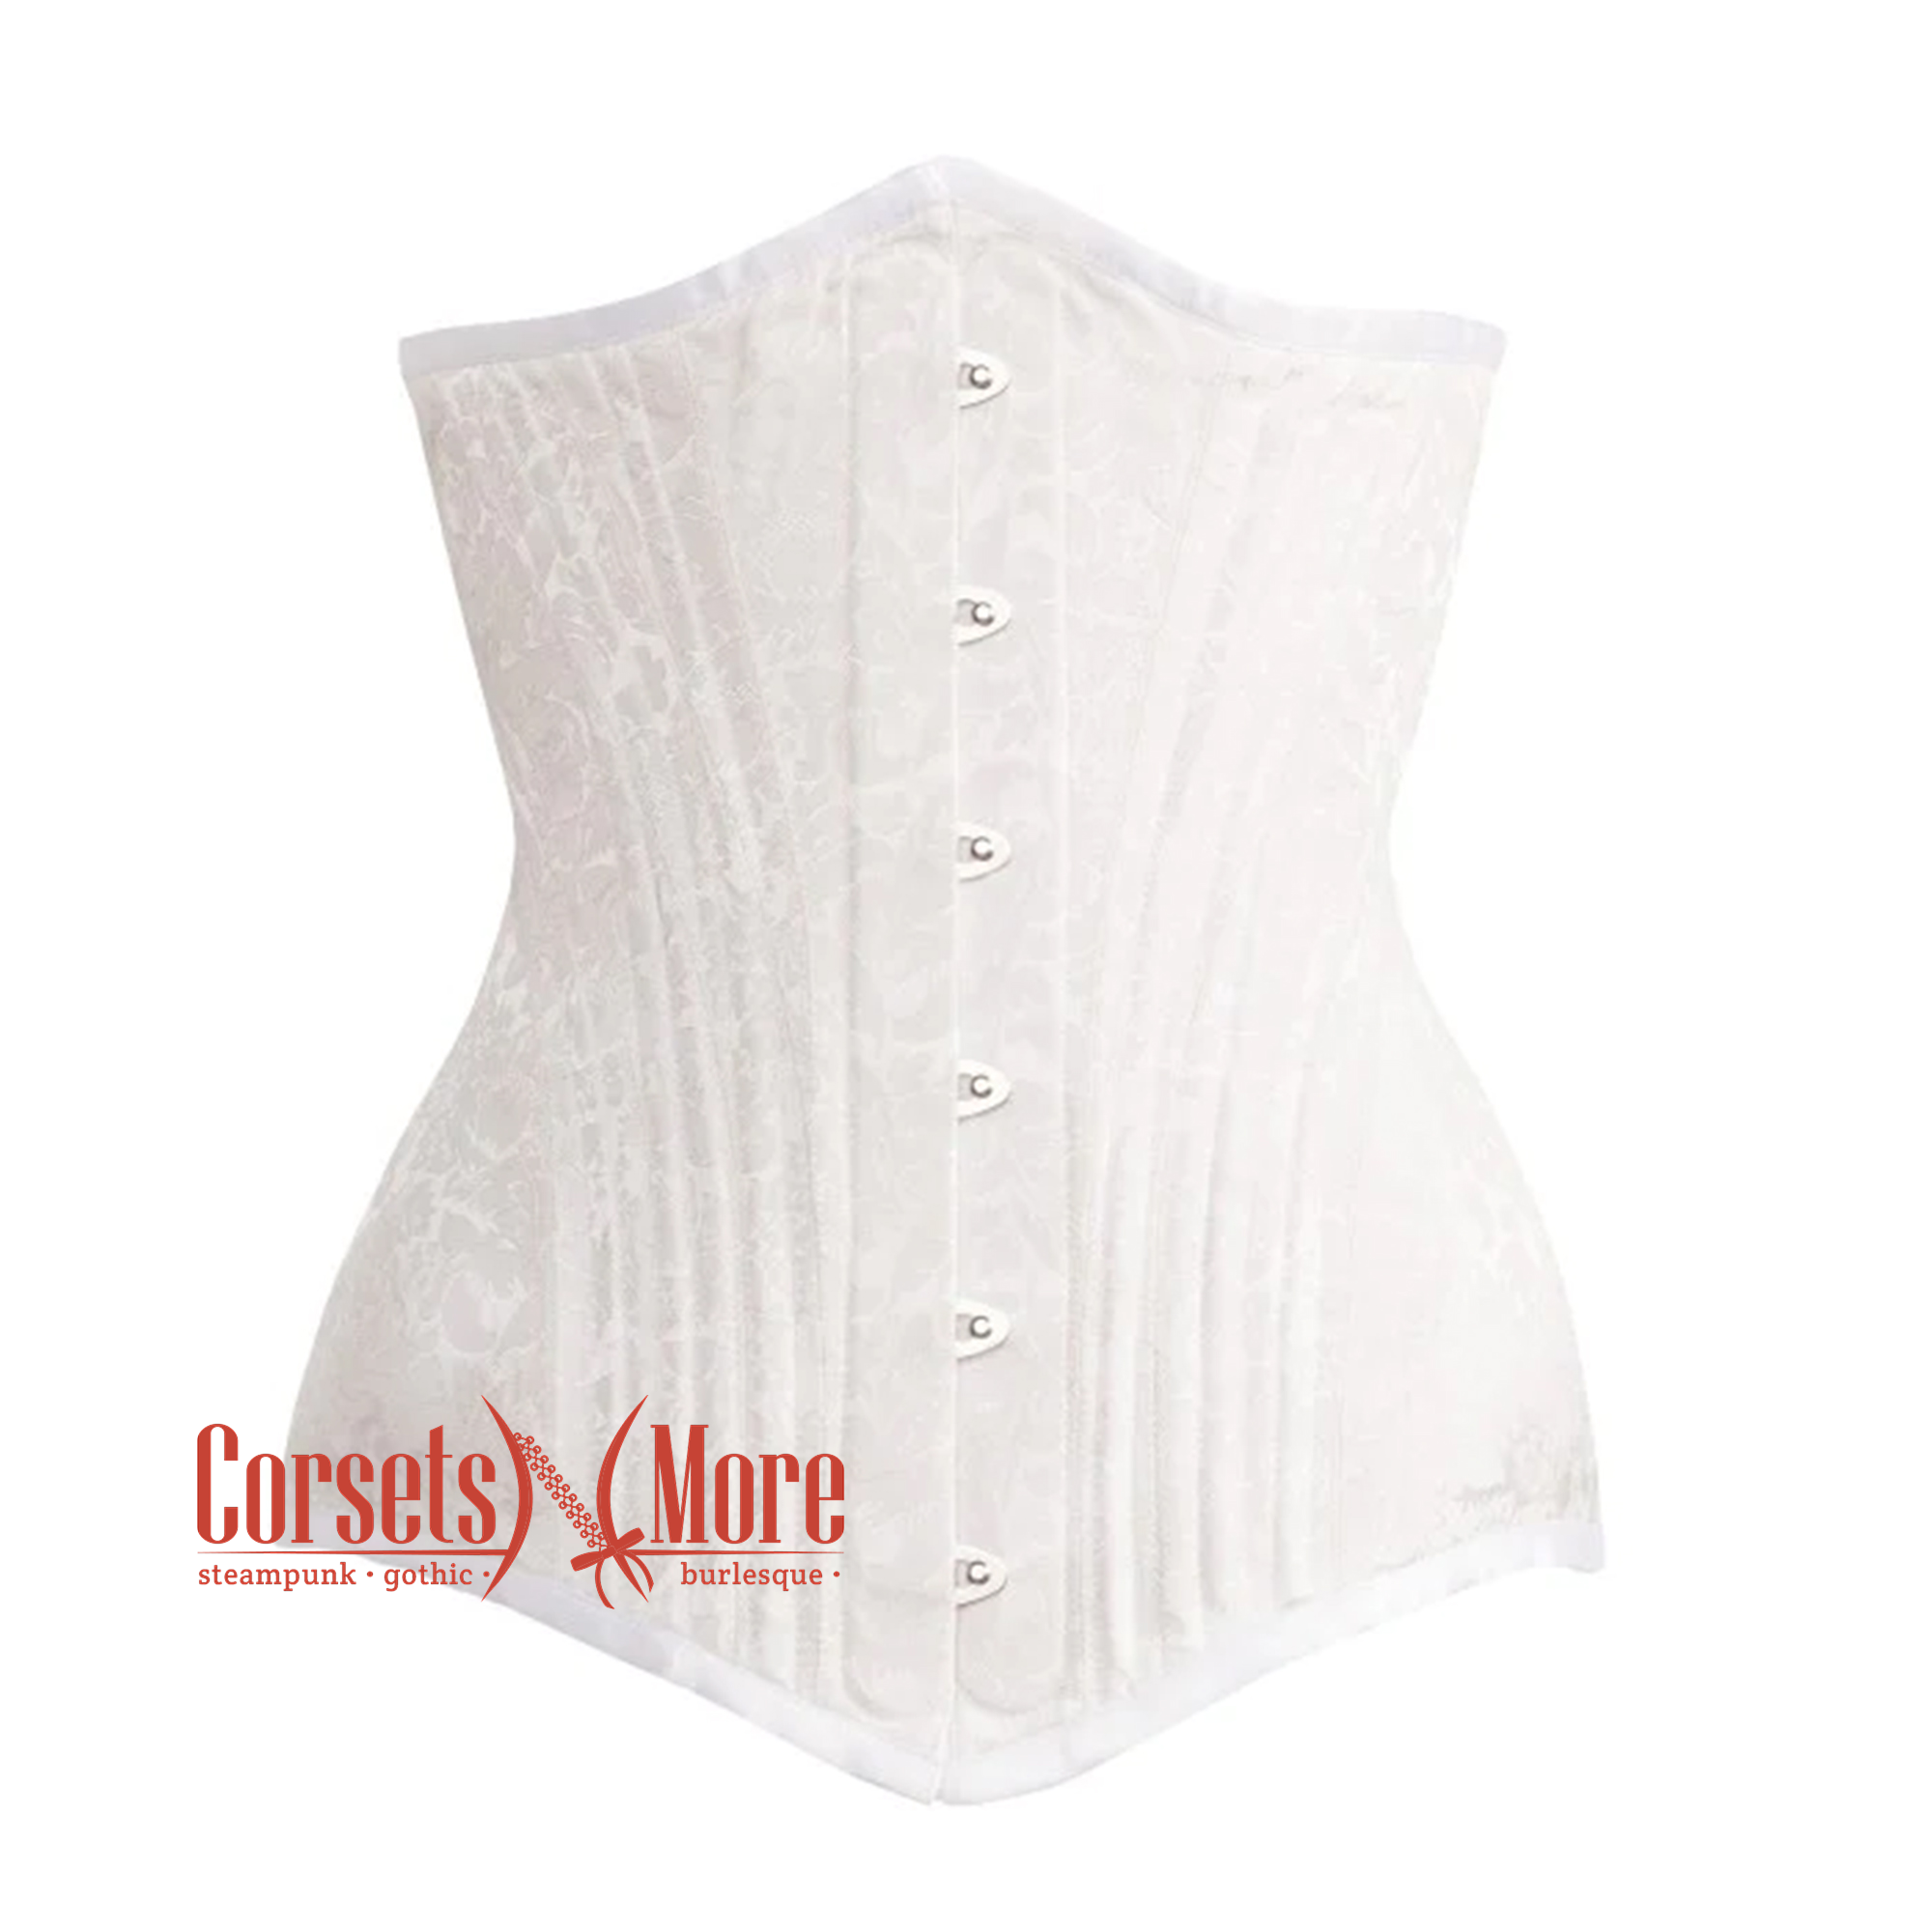 Steampunk Corset Striped Long Straps Bustier Vest Top with White